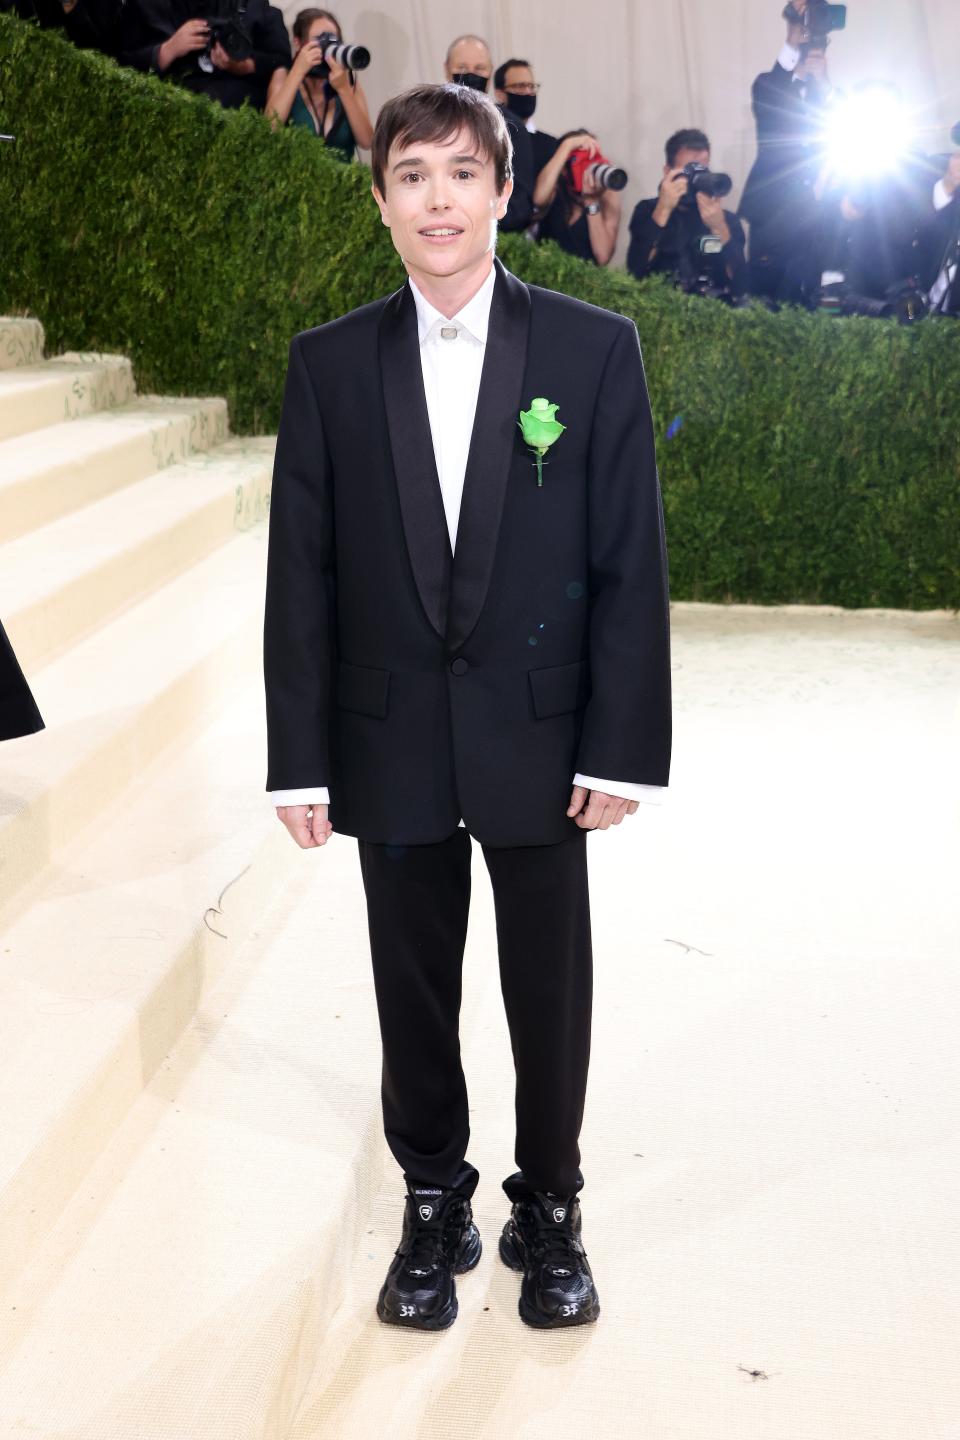 Elliot Page attends the 2021 Met Gala.